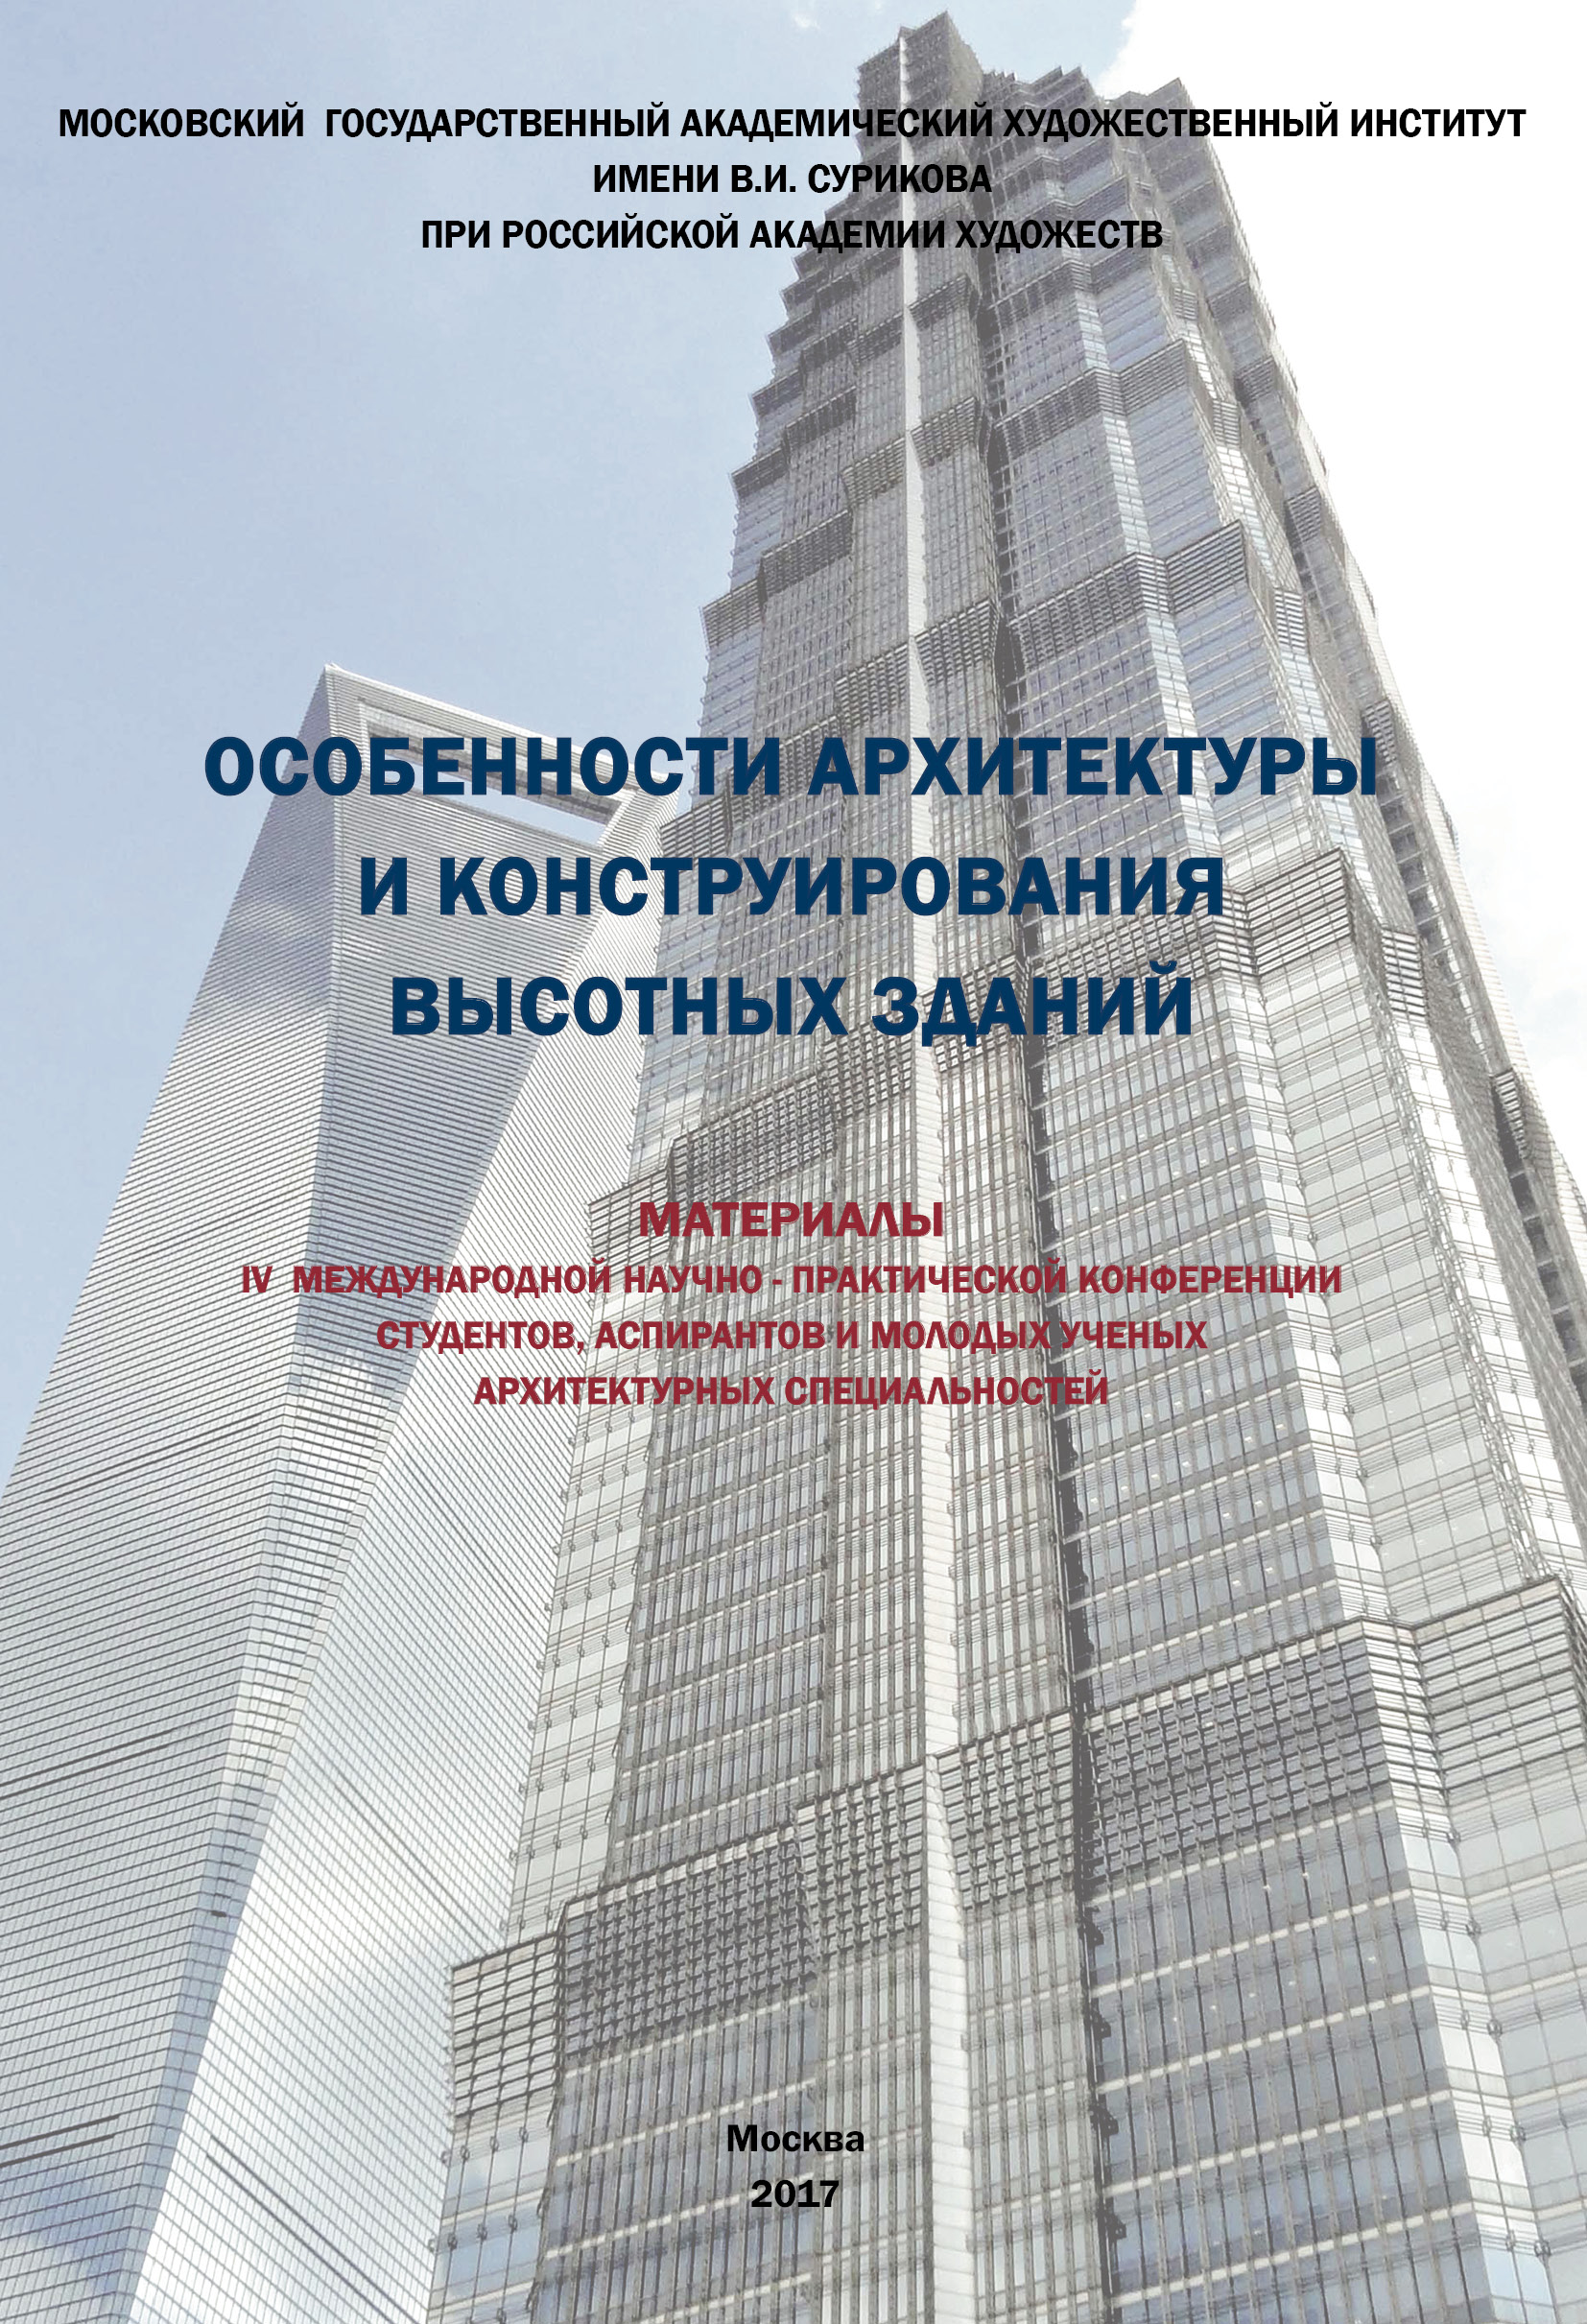                         IV international scientific and practical conference of students, postgraduates and young scientists of architectural specialties. Features of architecture and construction of high-rise buildings.
            